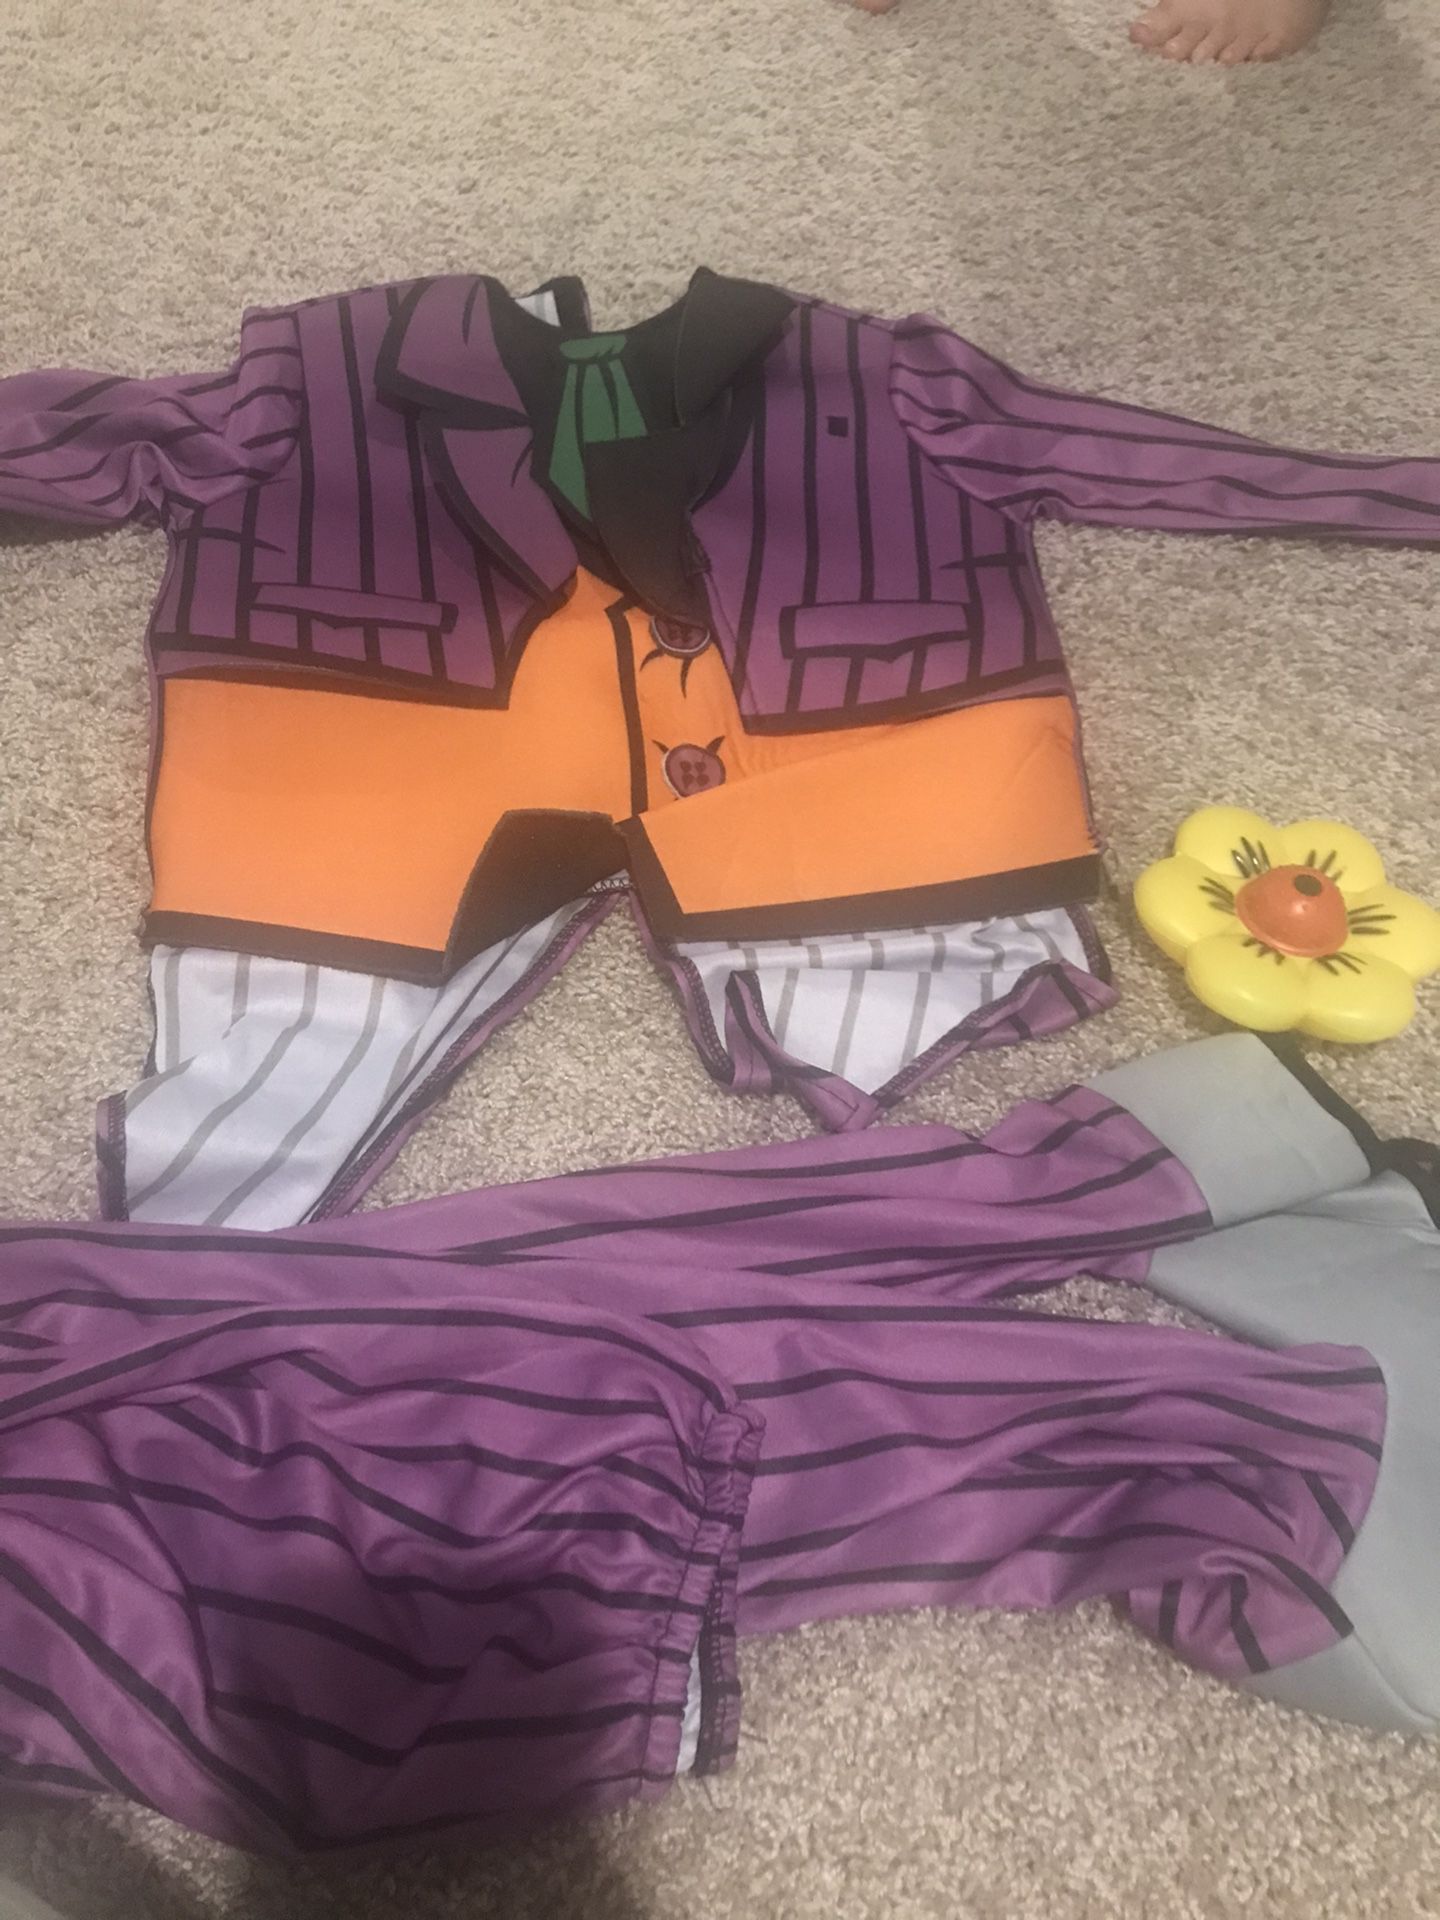 Joker Costume For Free Medium Size For 5-7 Years Old 